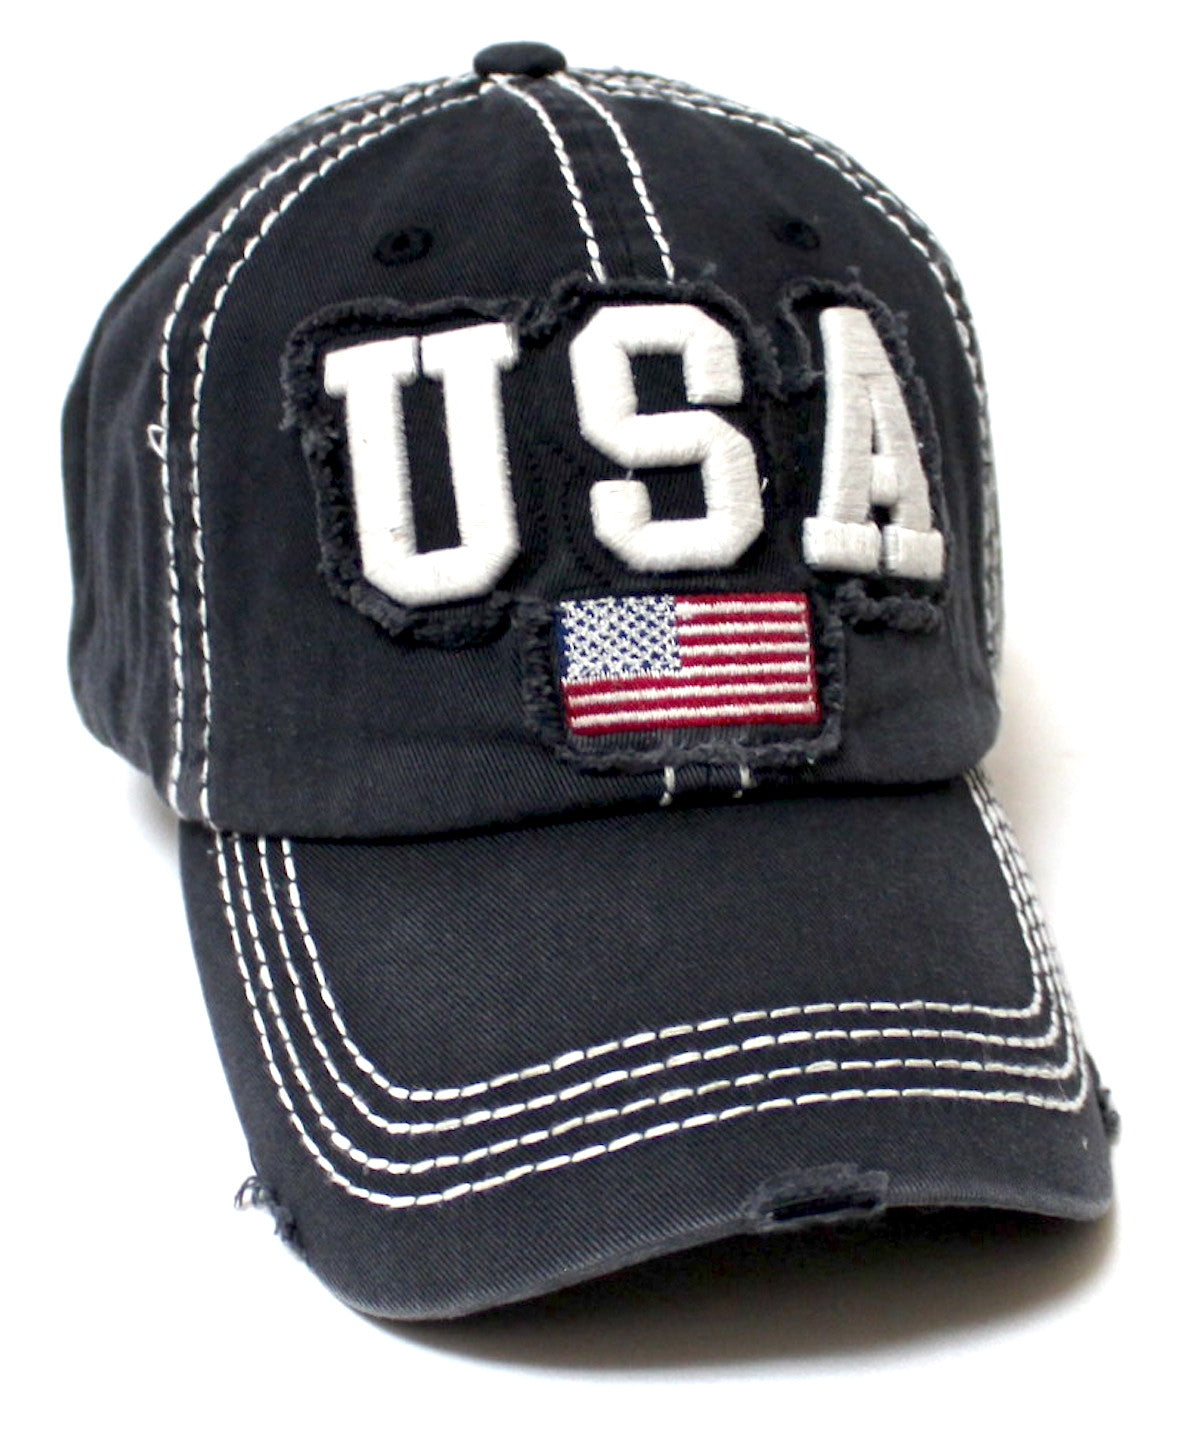 CAPS 'N VINTAGE Unisex USA Distressed Baseball Cap American Flag Patch Embroidery Monogram Hat